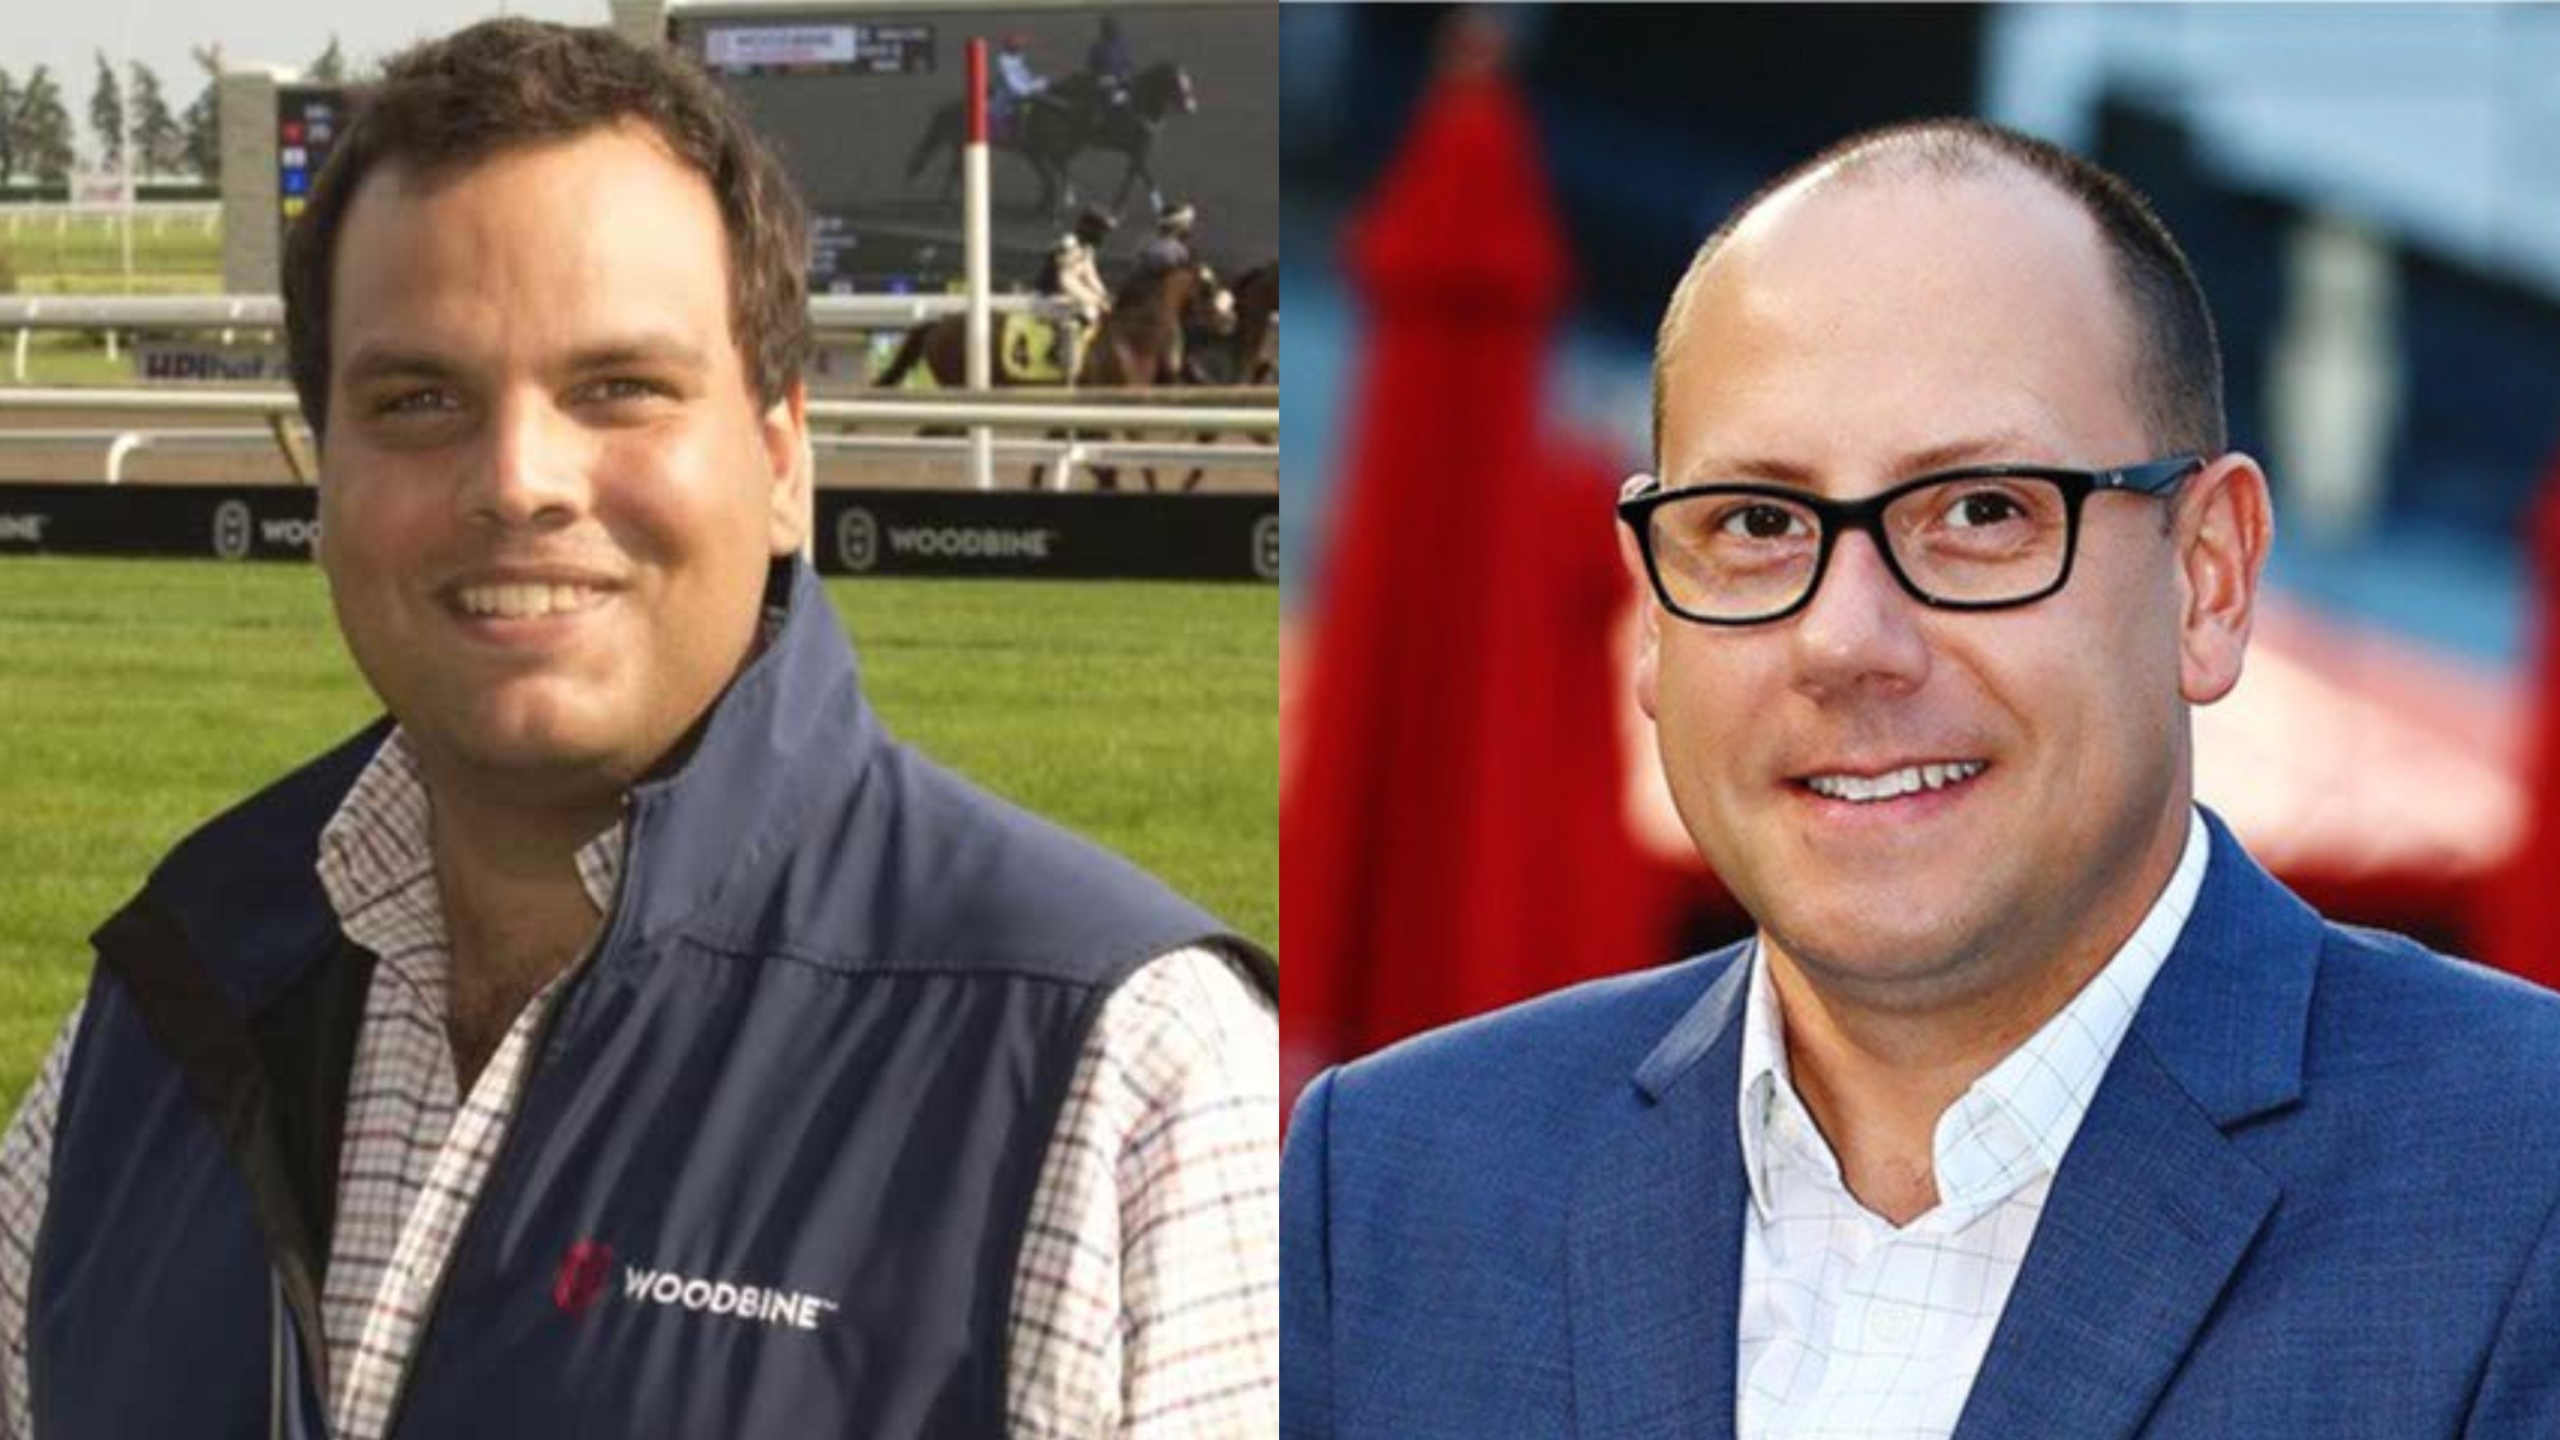 Woodbine Solidifies Racing Leadership With Promotions Of Lawson, McLinchey